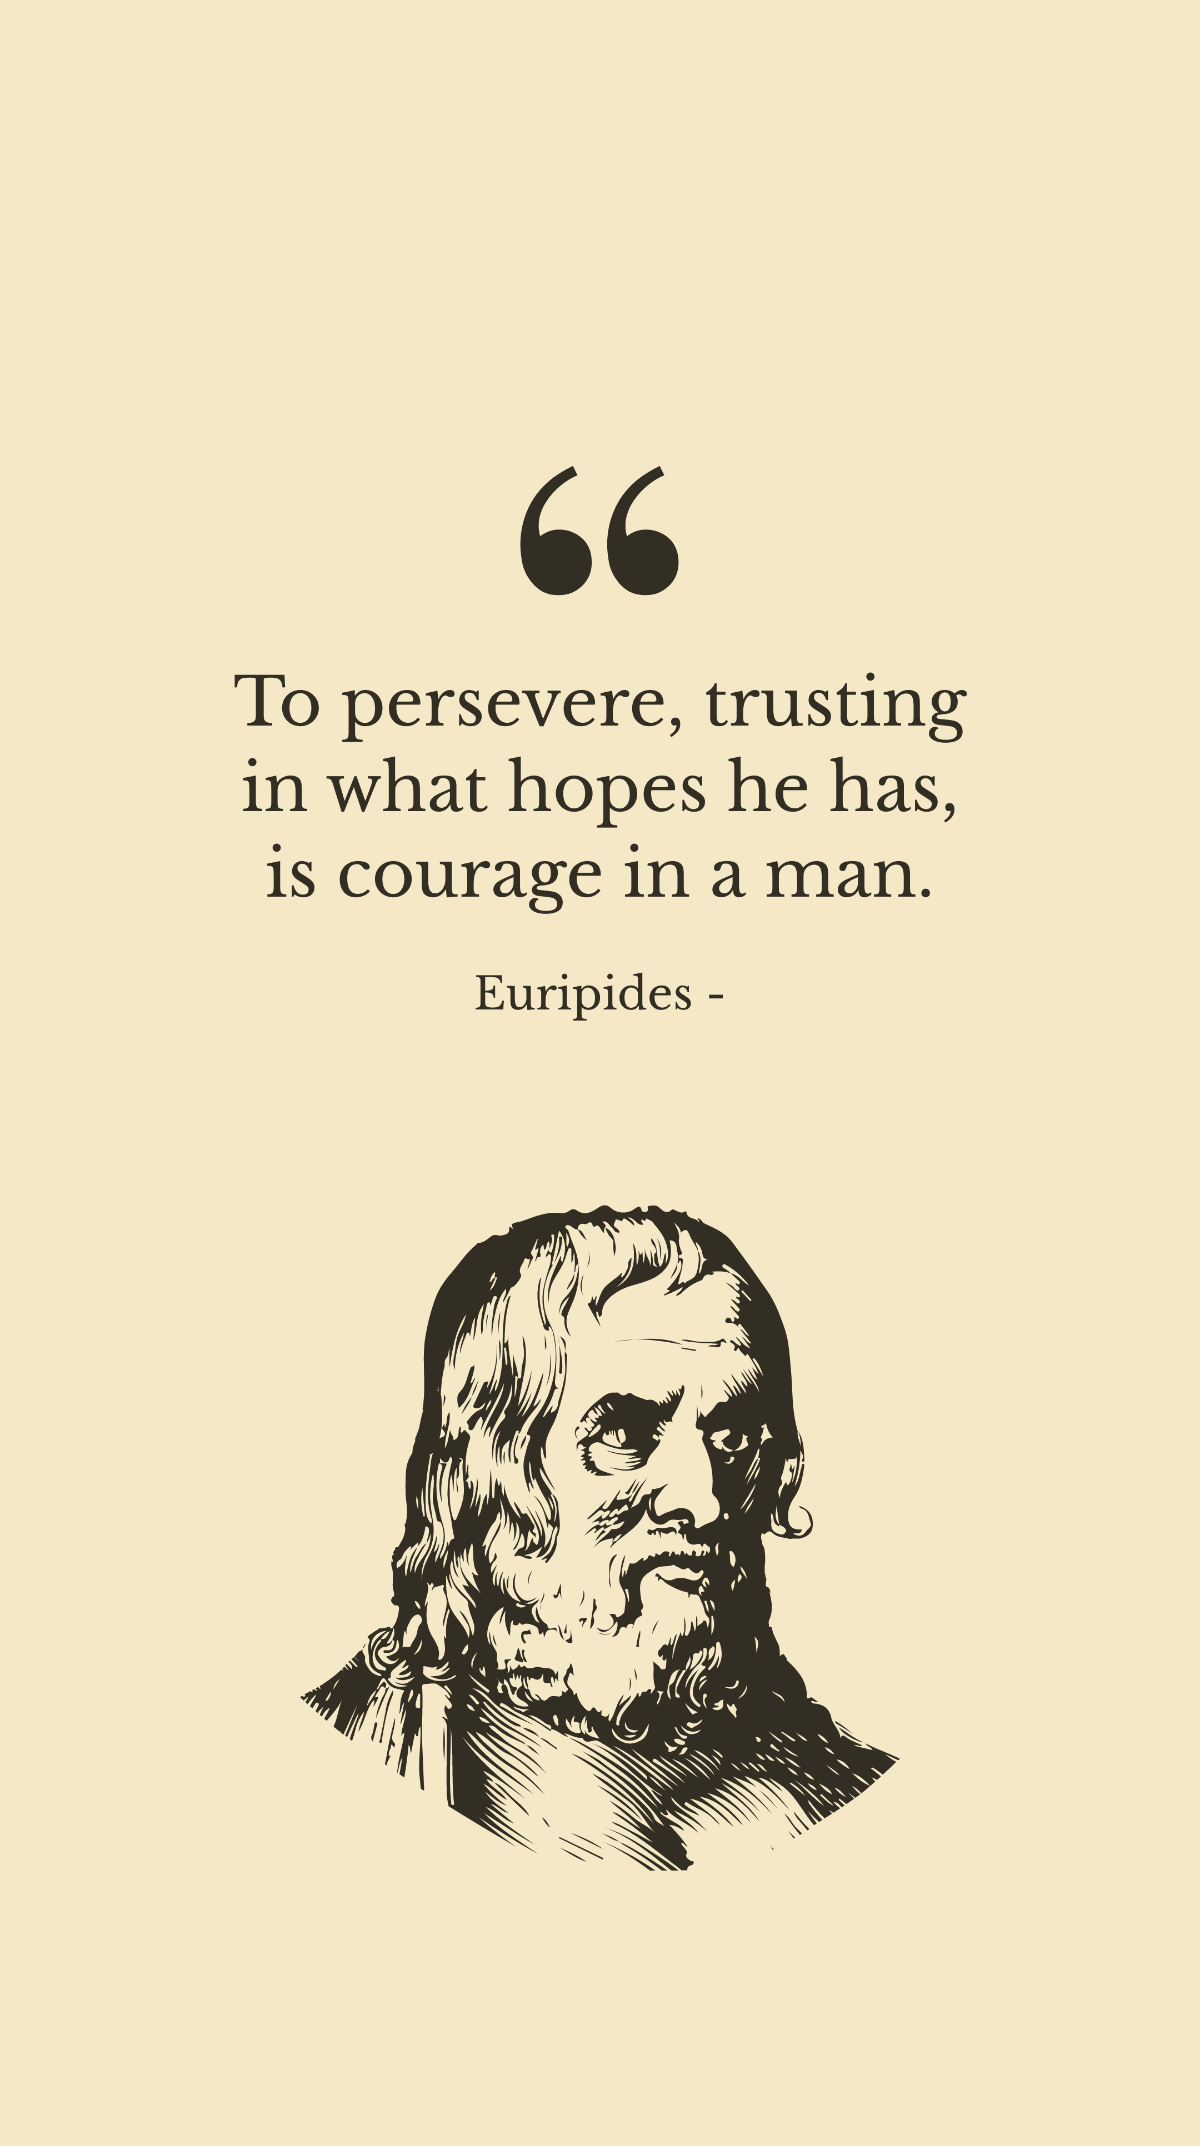 Free Euripides - To persevere, trusting in what hopes he has, is courage in a man. Template